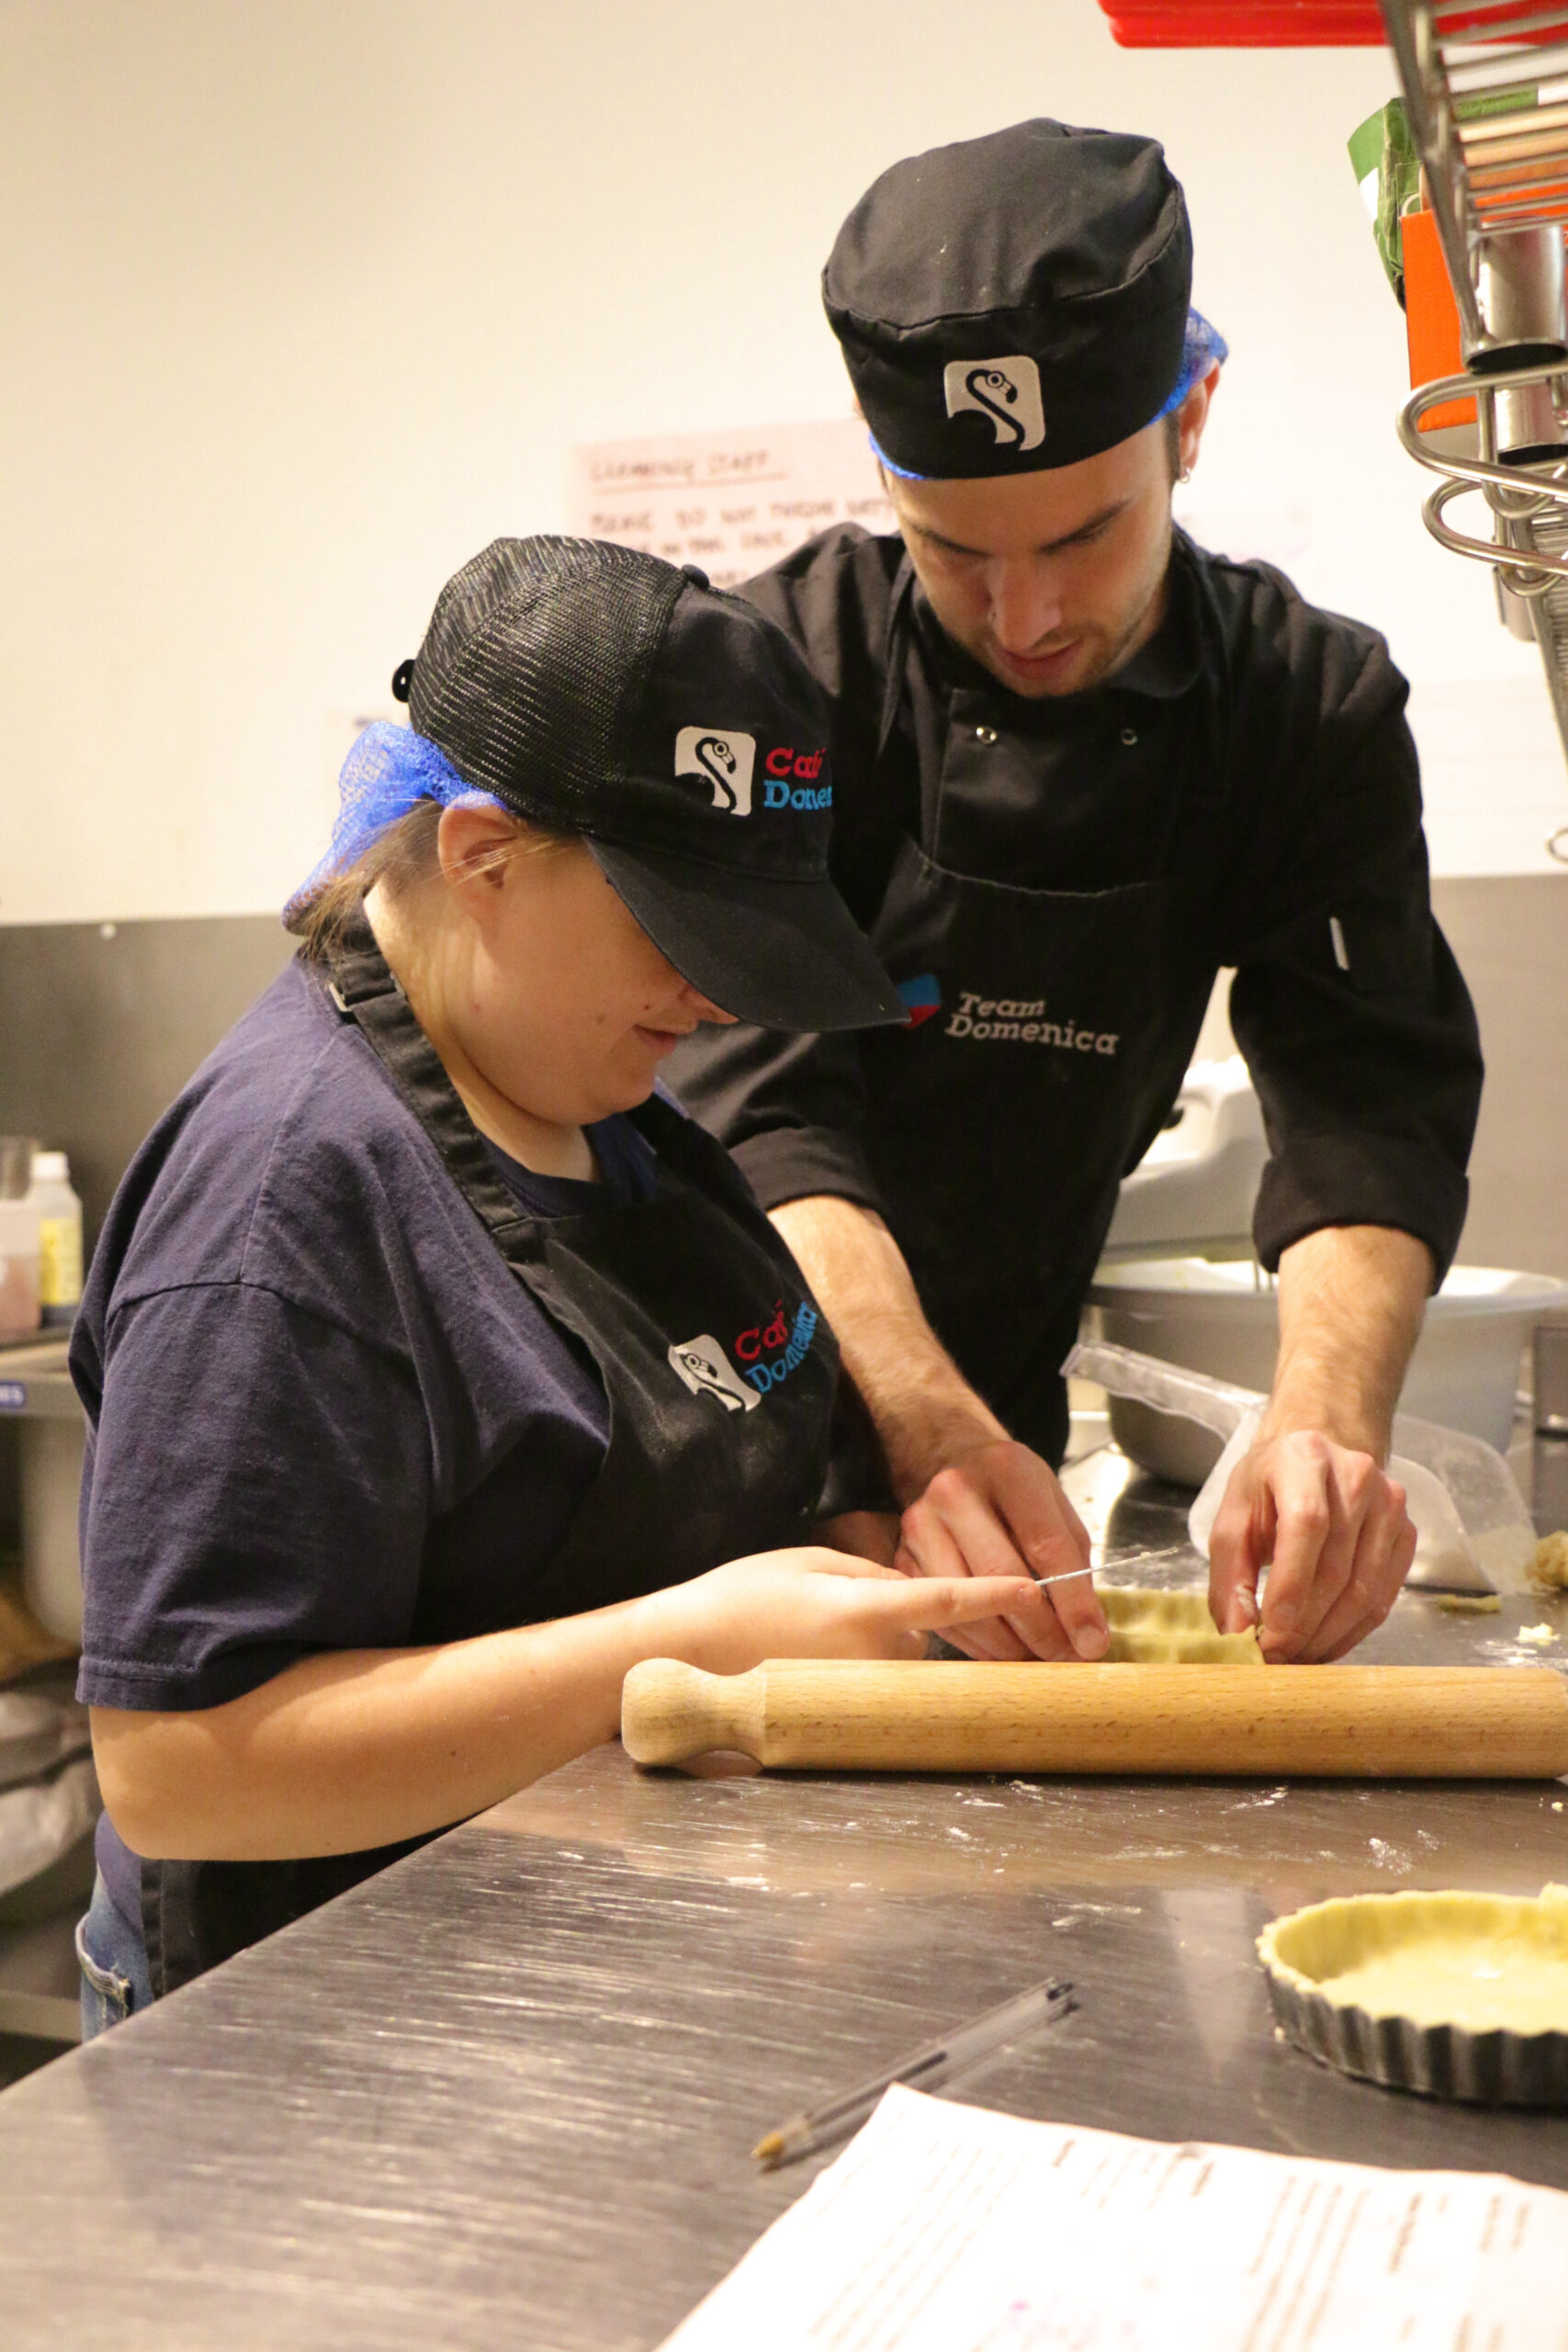 Two people work together to line and dish waith pastry. Both are wearing A Café Domenica hat and apron.